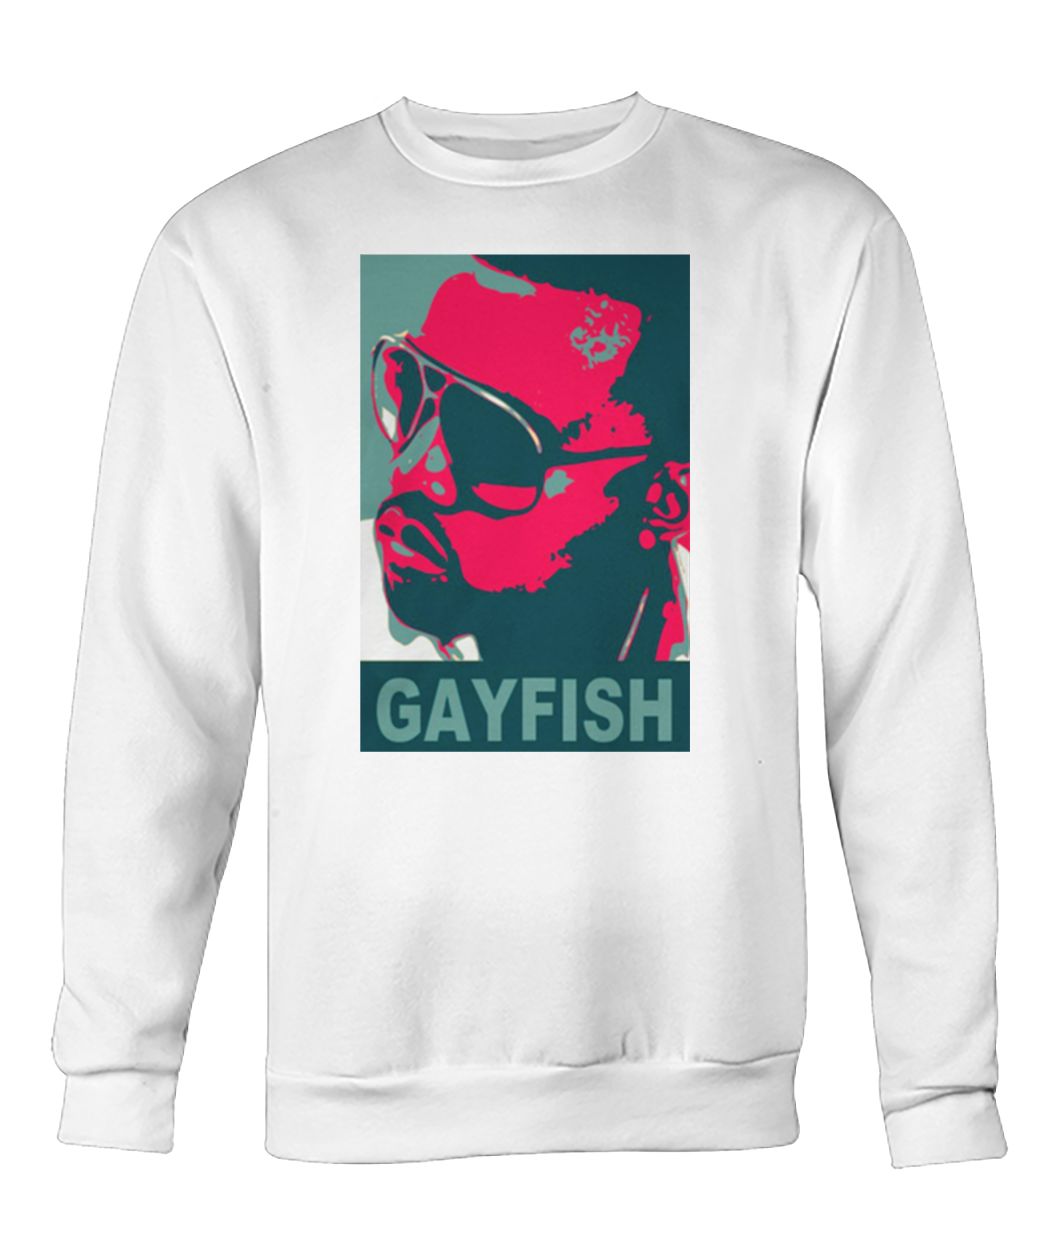 South park kanye west is a gay fish crew neck sweatshirt